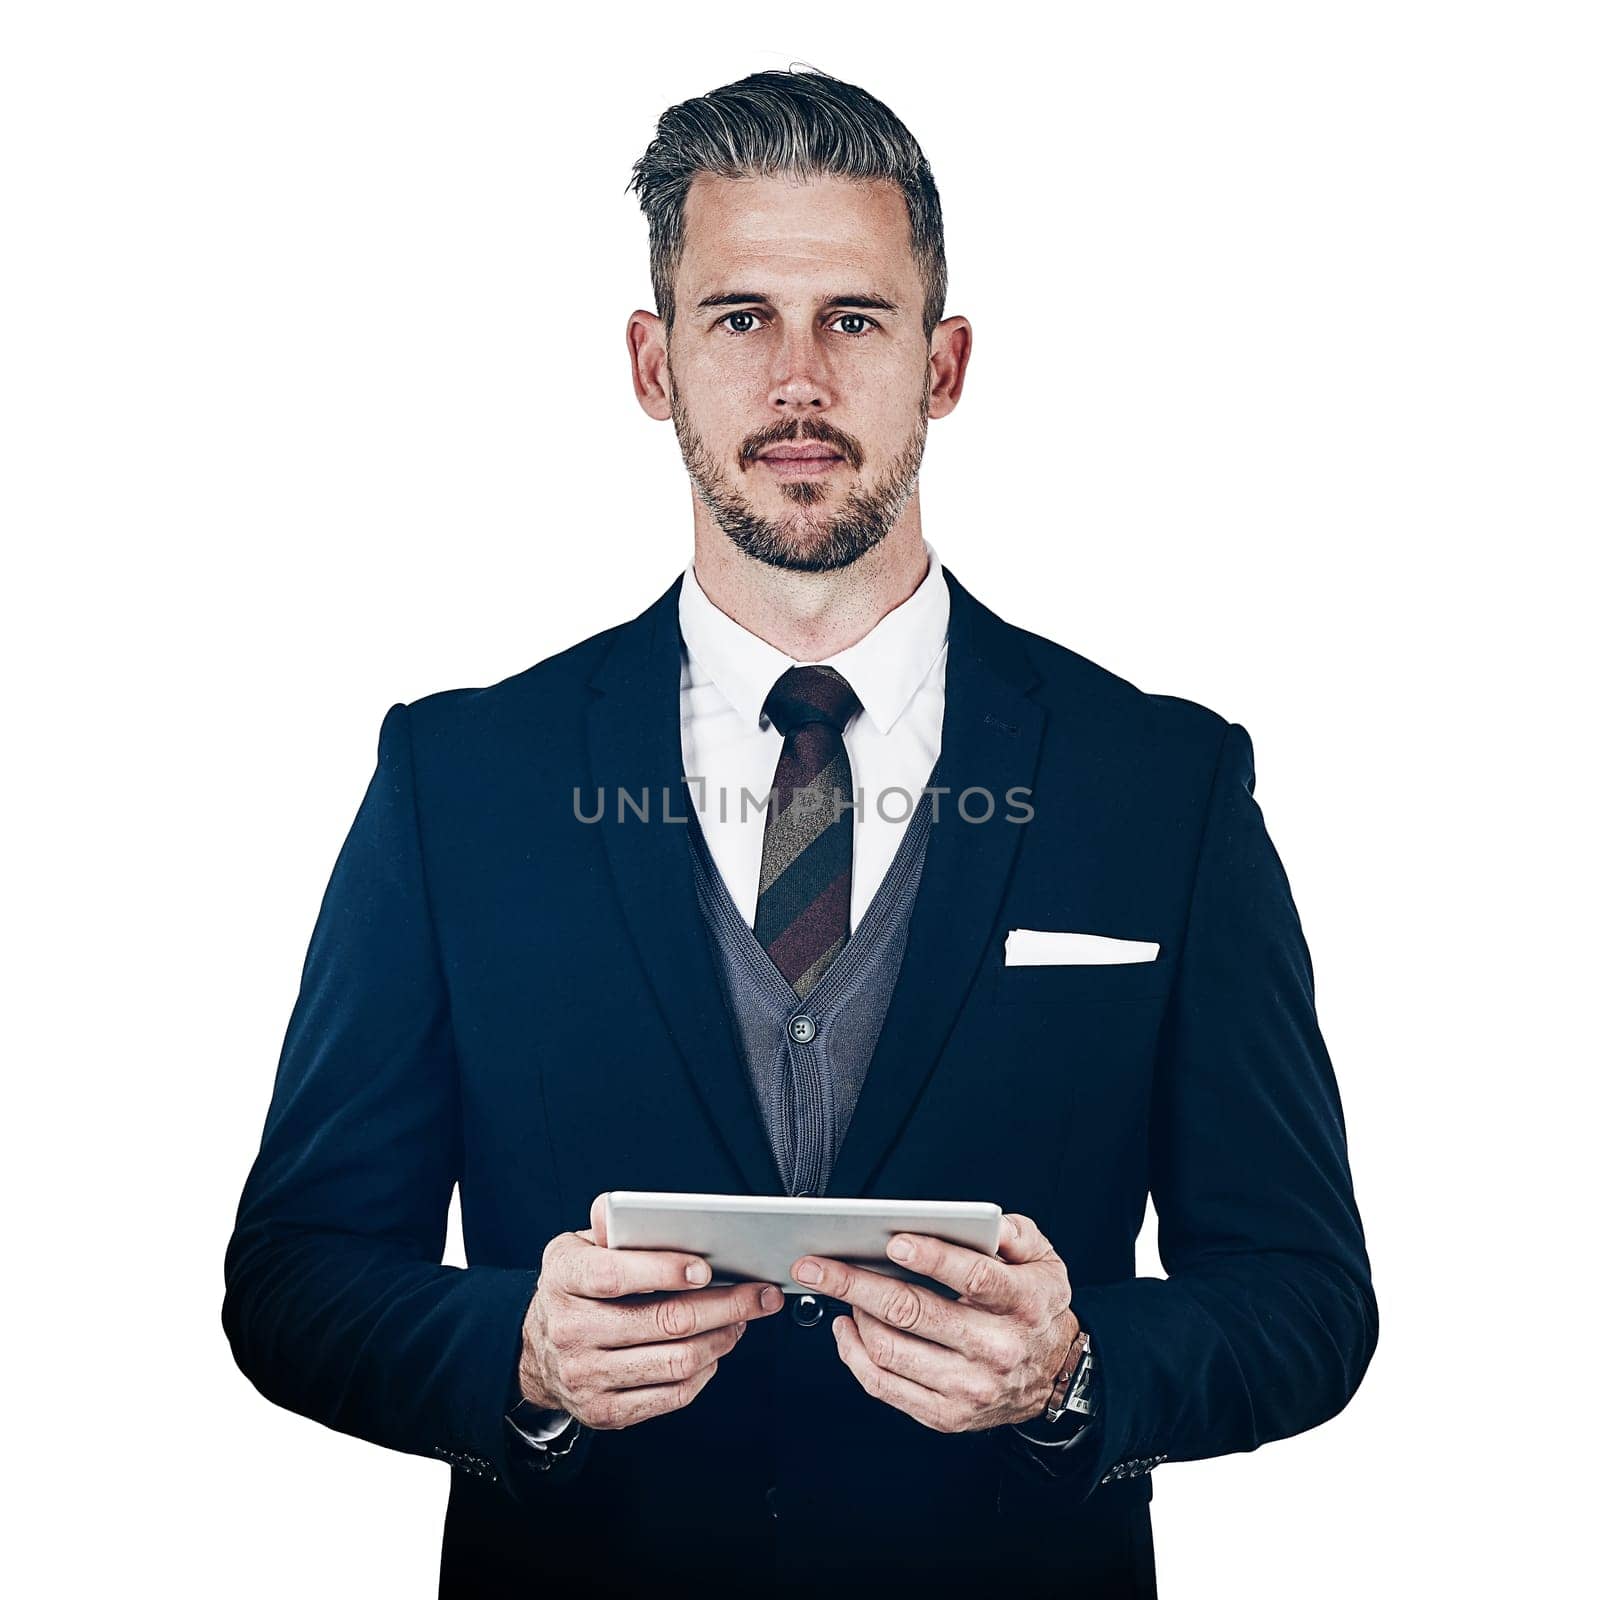 Keeping my business tasks digitized. Studio portrait of a businessman using a digital tablet against a white background